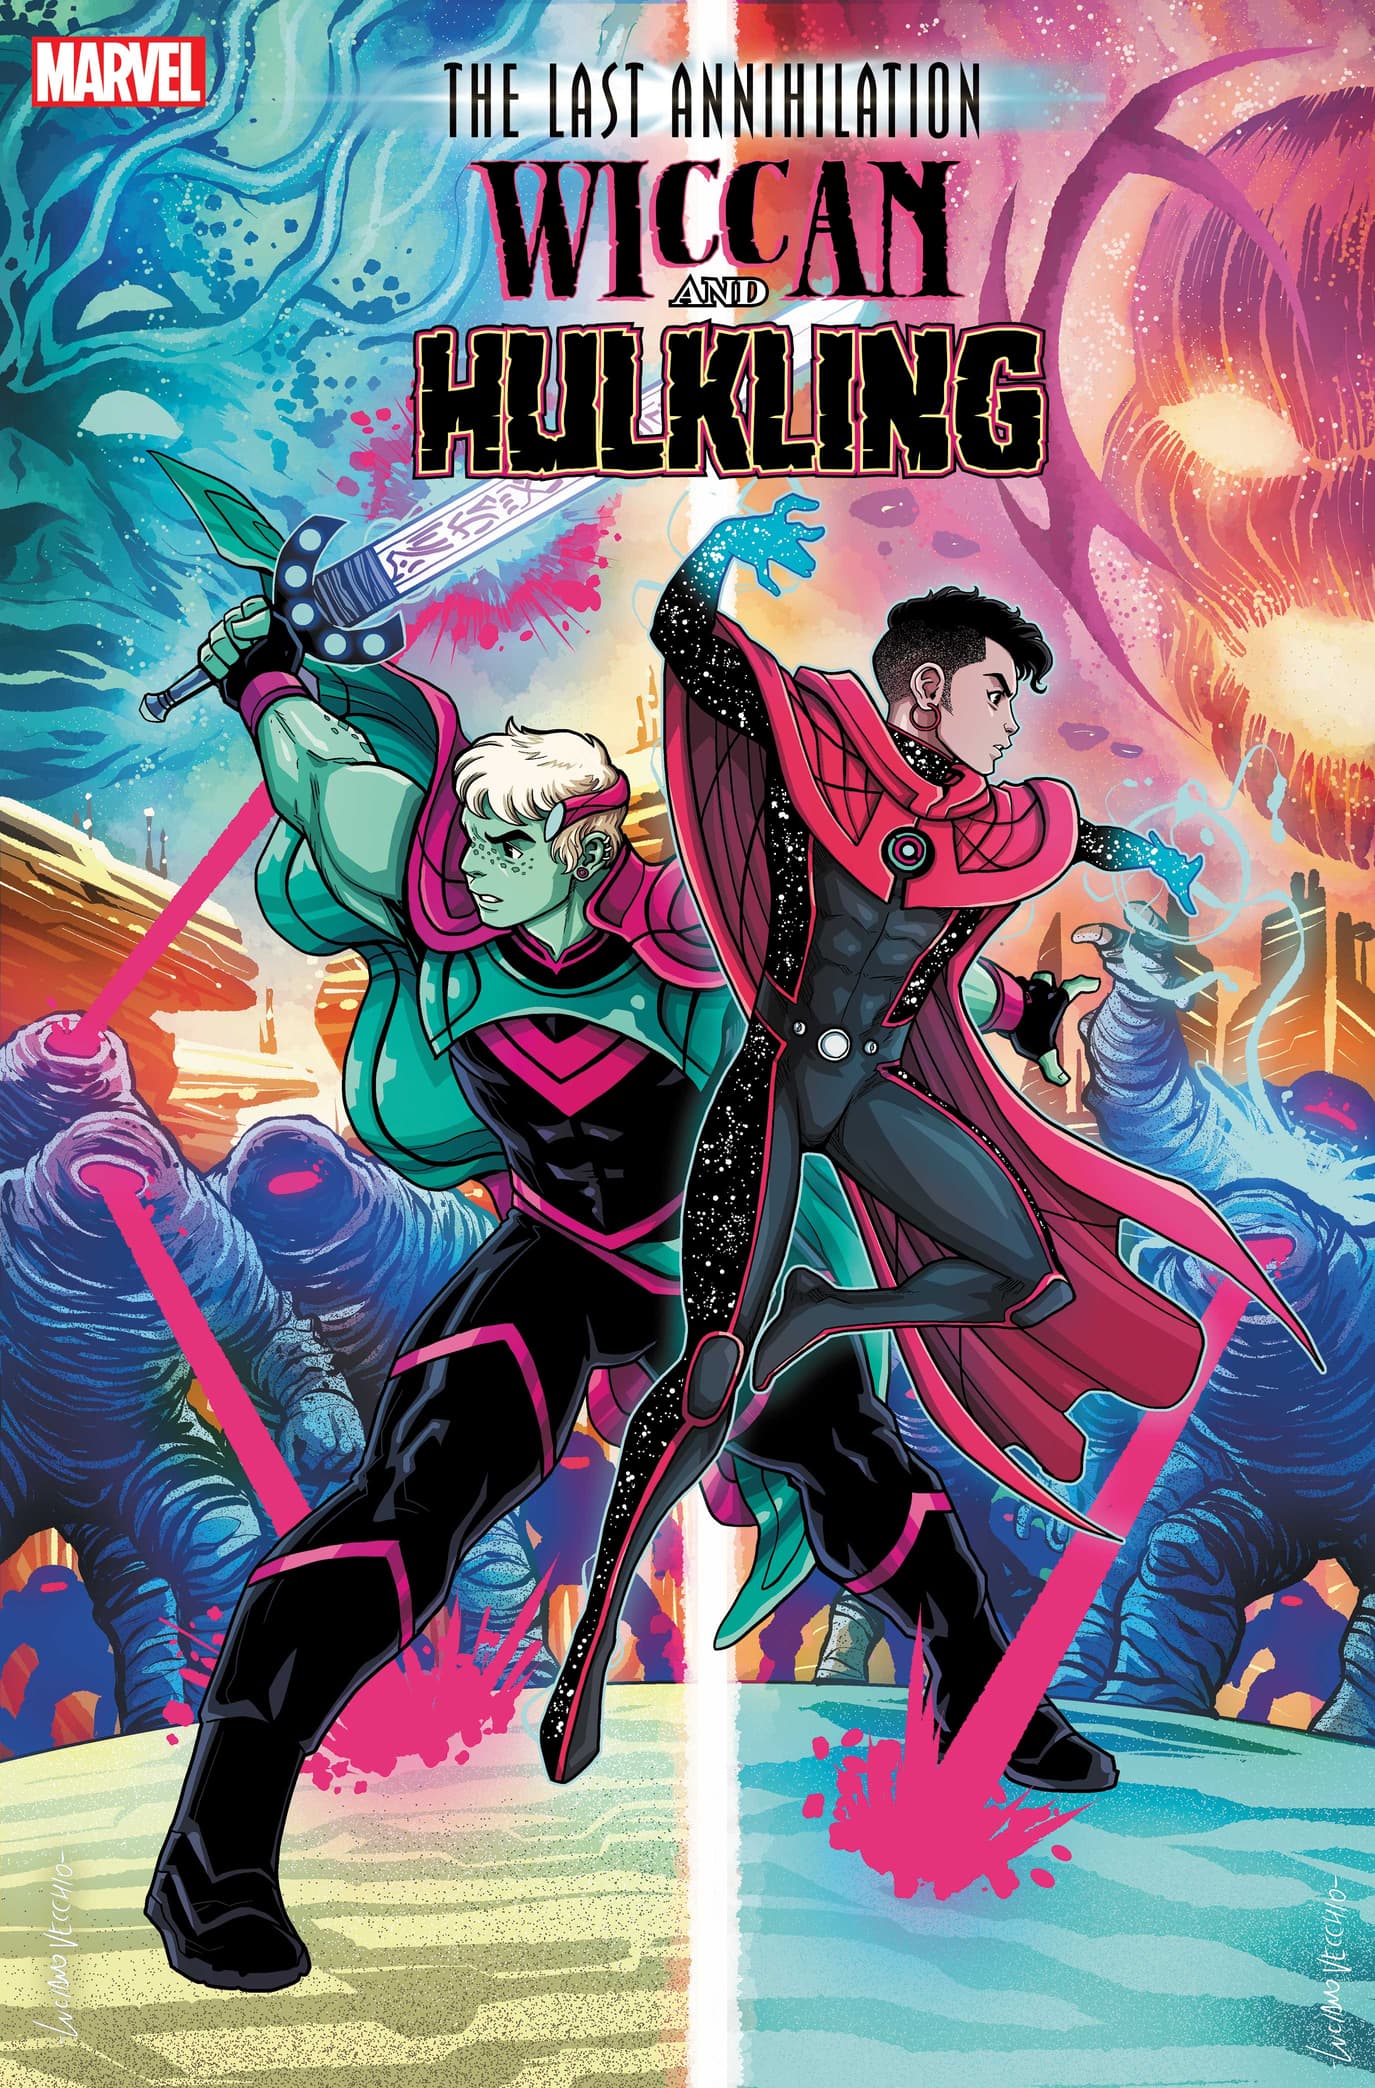 LAST ANNIHILATION: WICCAN & HULKLING #1 cover by Luciano Vecchio